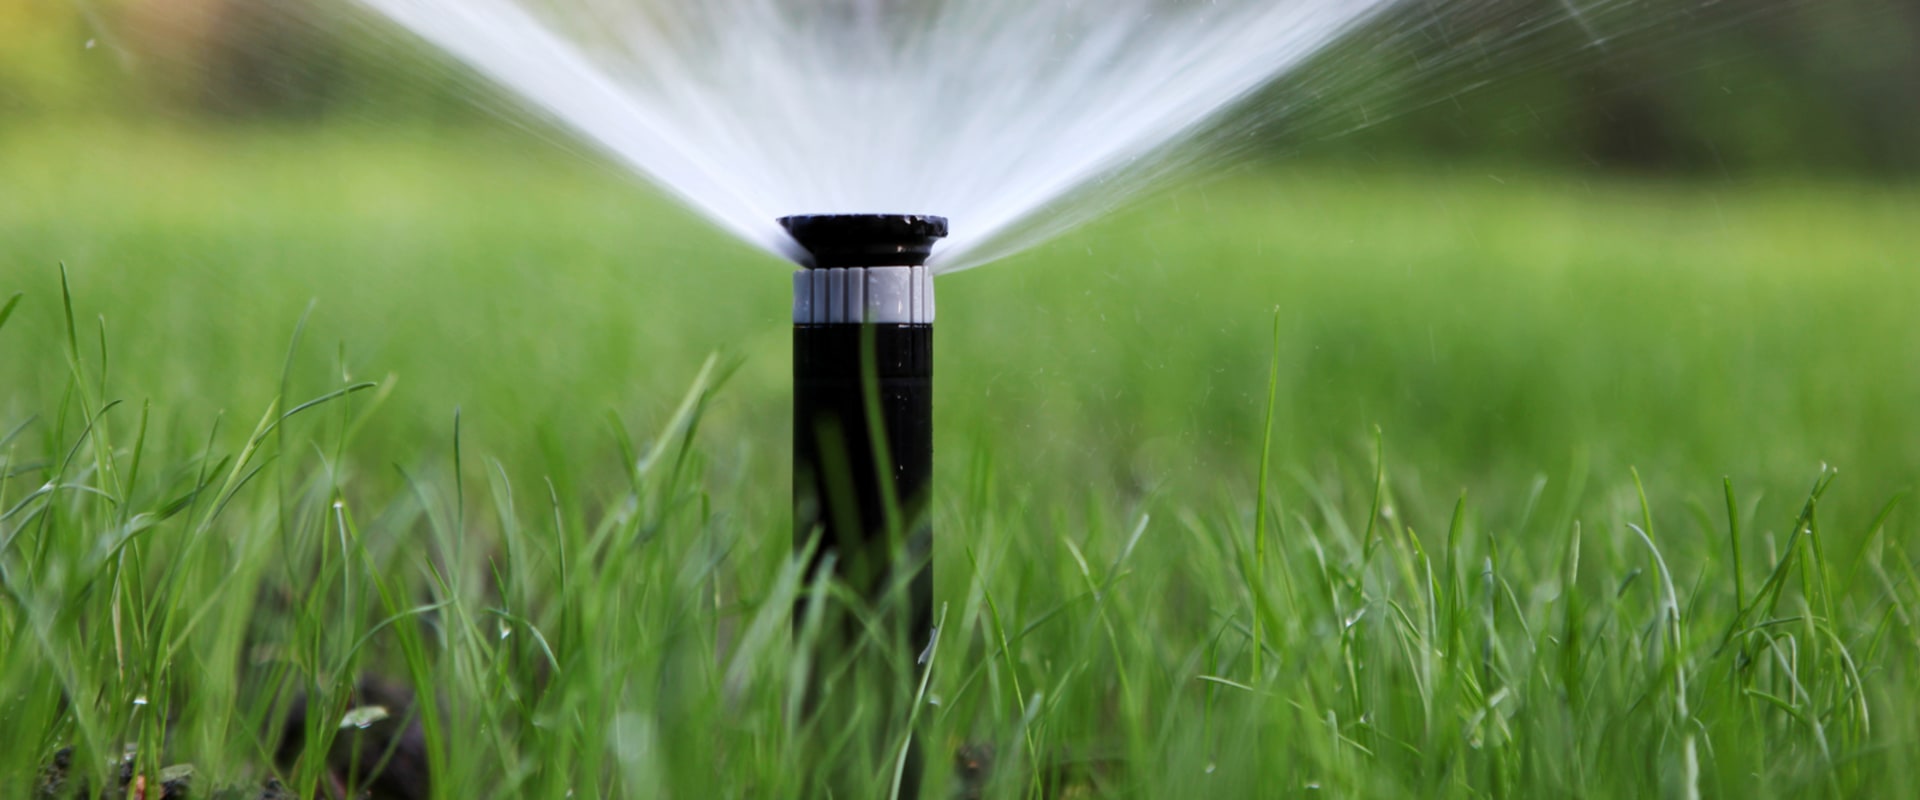 How to Install Sprinkler System Step by Step in Omaha